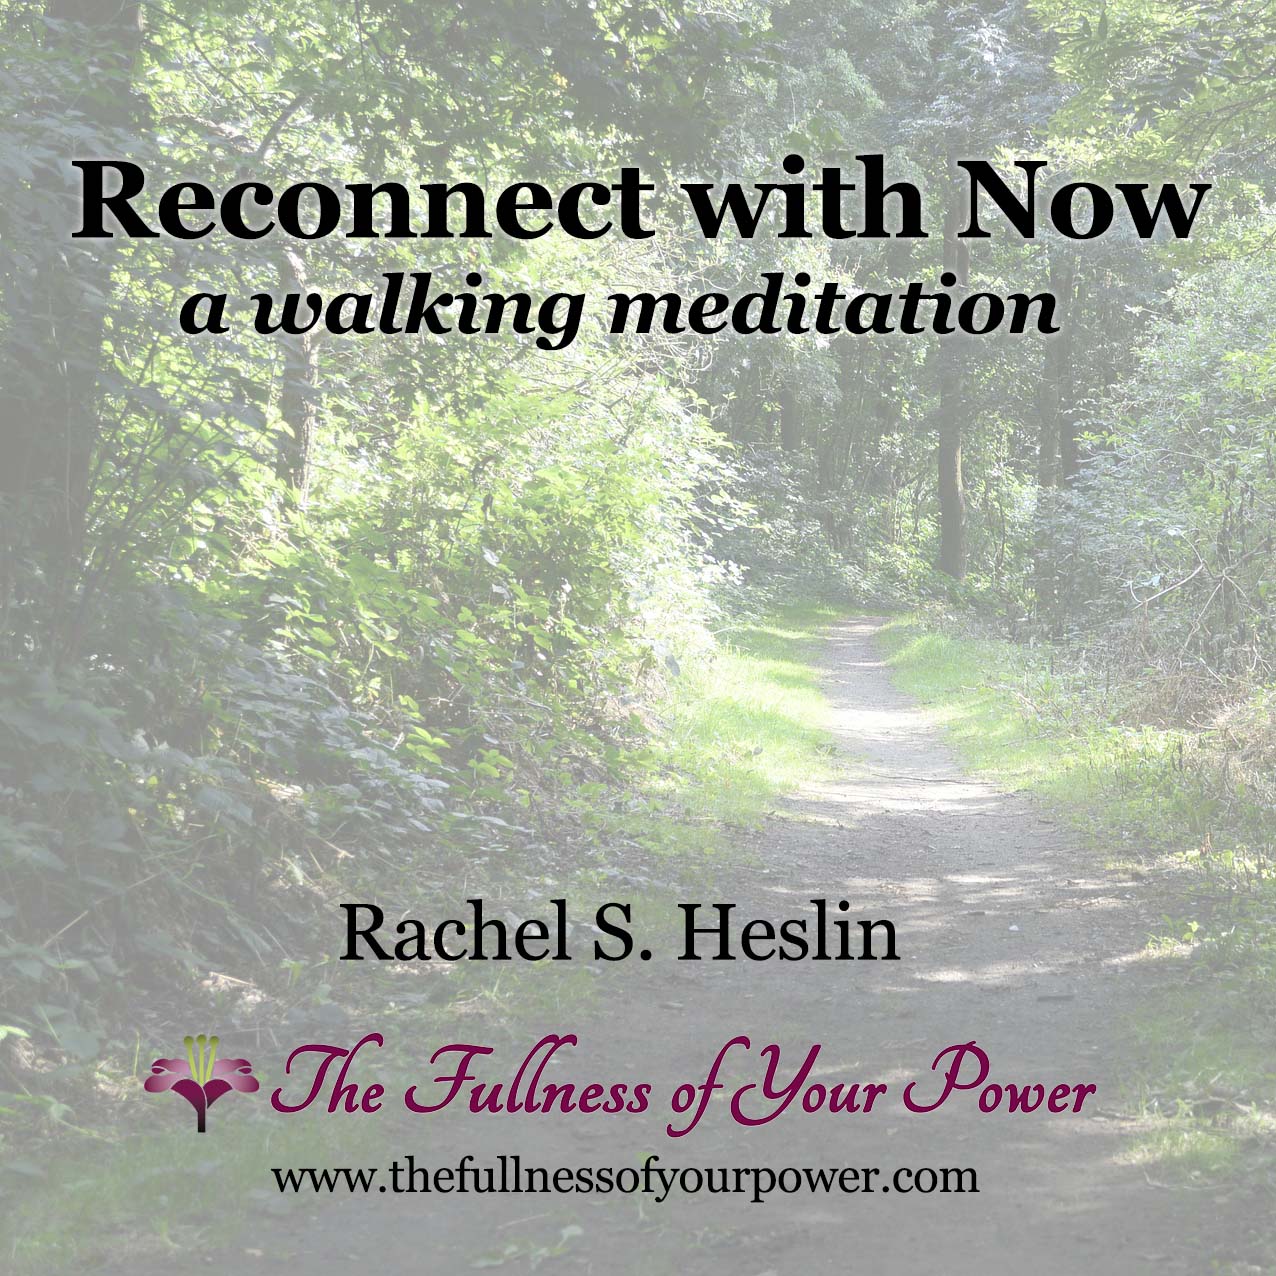 Reconnect with Now: a walking meditation